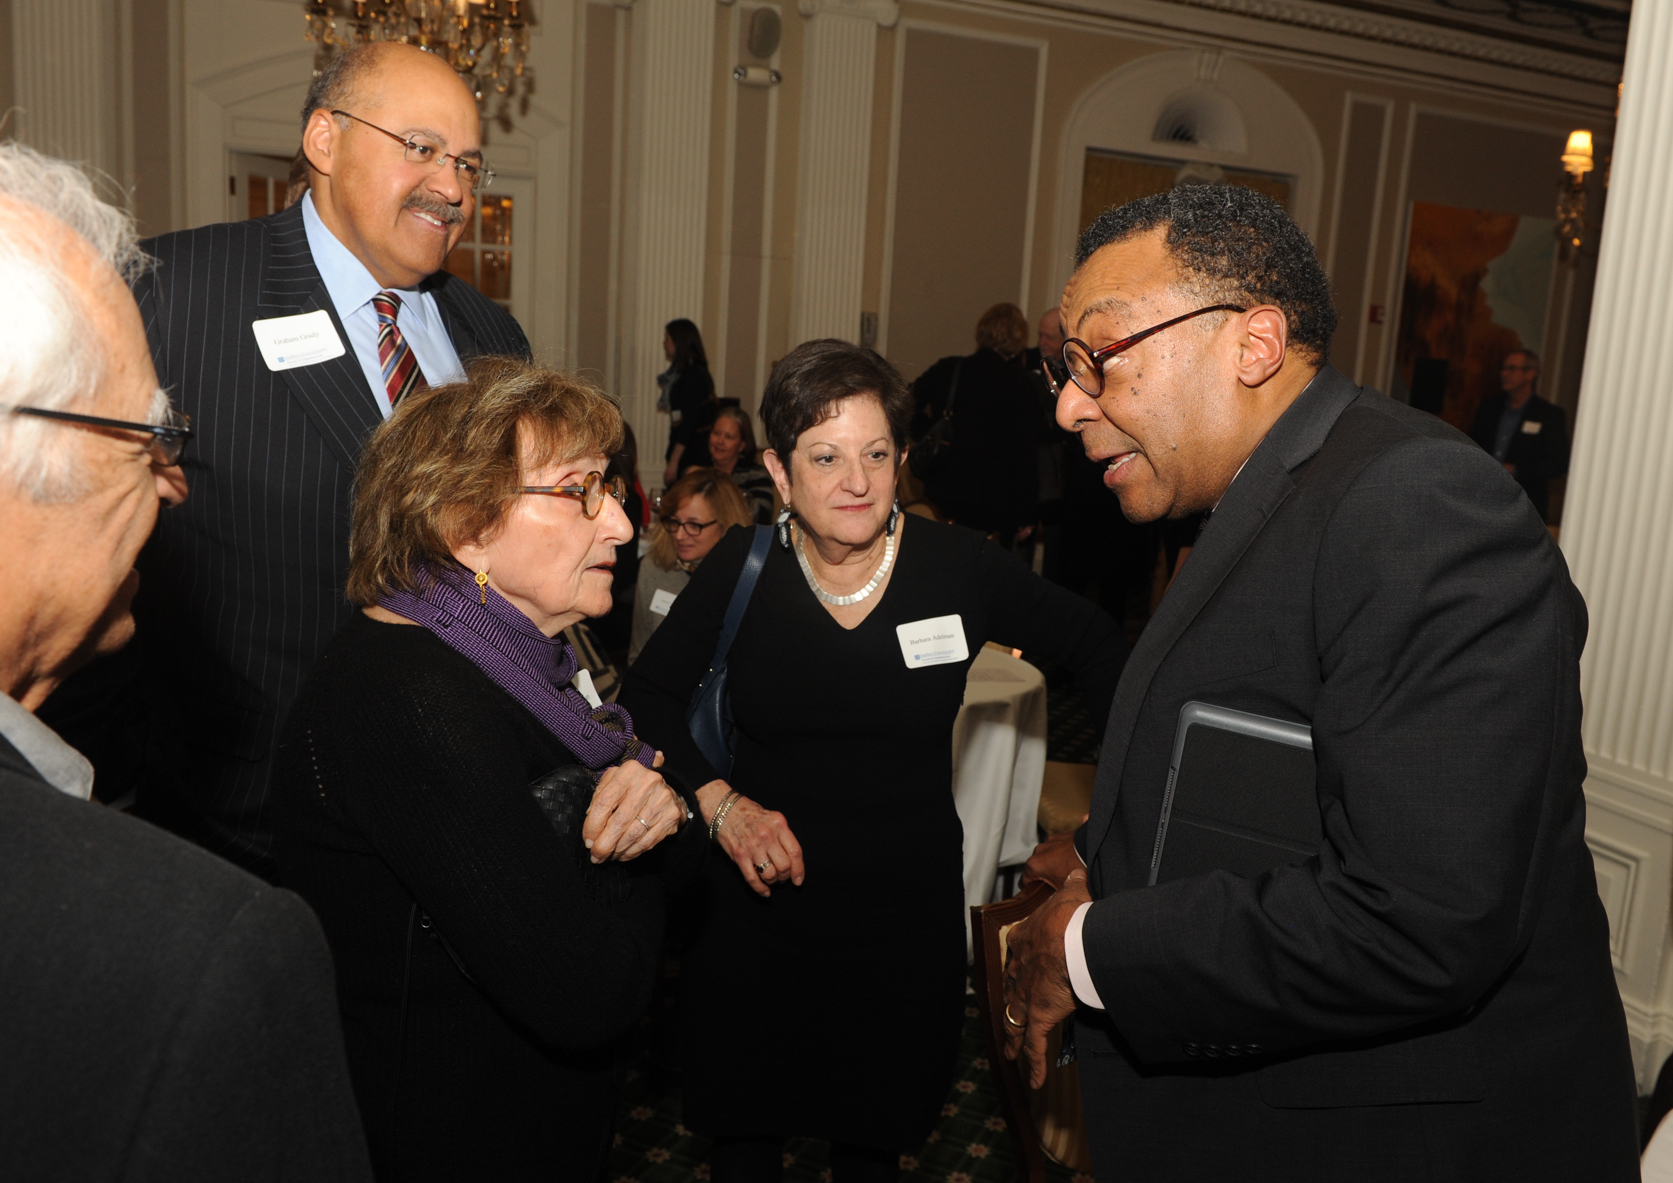 Clarence Page speaks with guests of "An Evening with Clarence Page". (Photo by Paul Berg.)